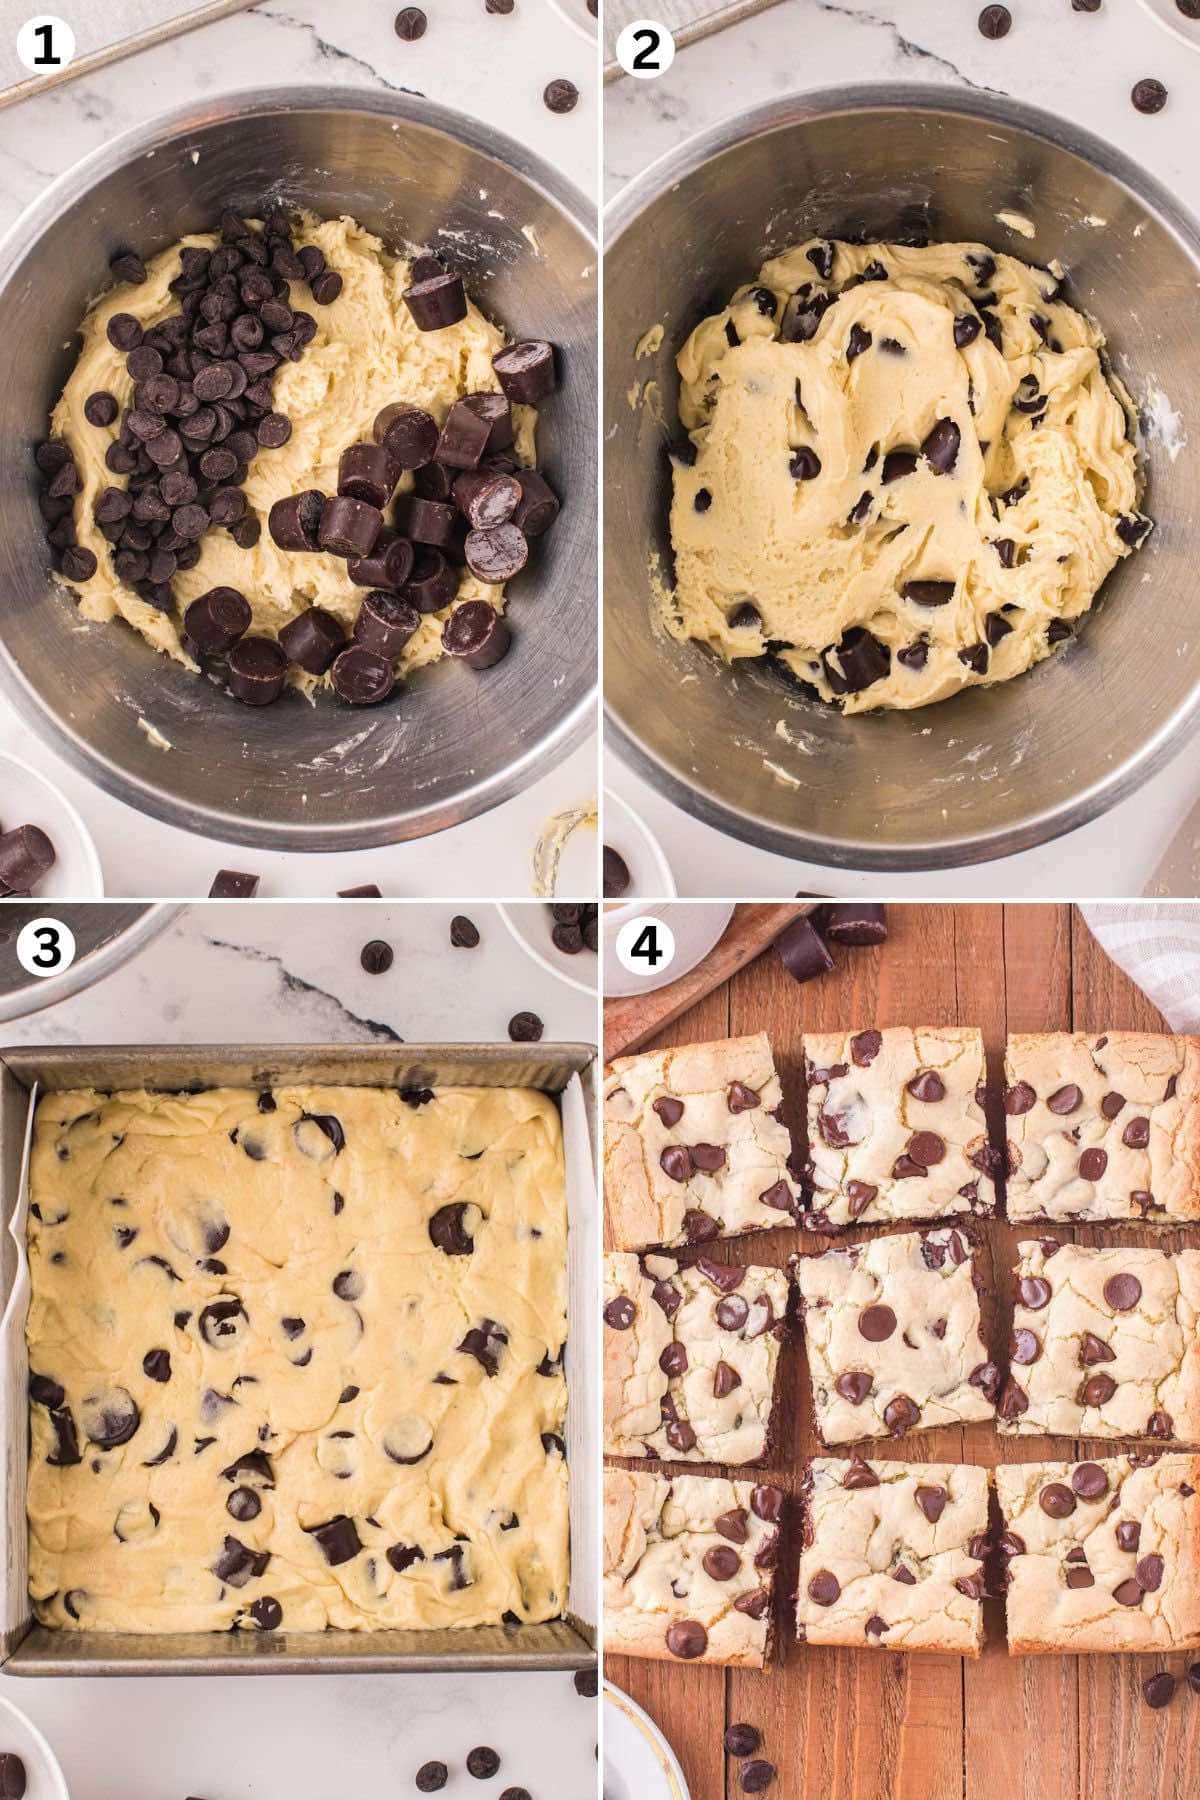 Add Rolos and chocolate chips into the batter mixture and mix evenly. Spread the batter in the pan. Cut into squares.